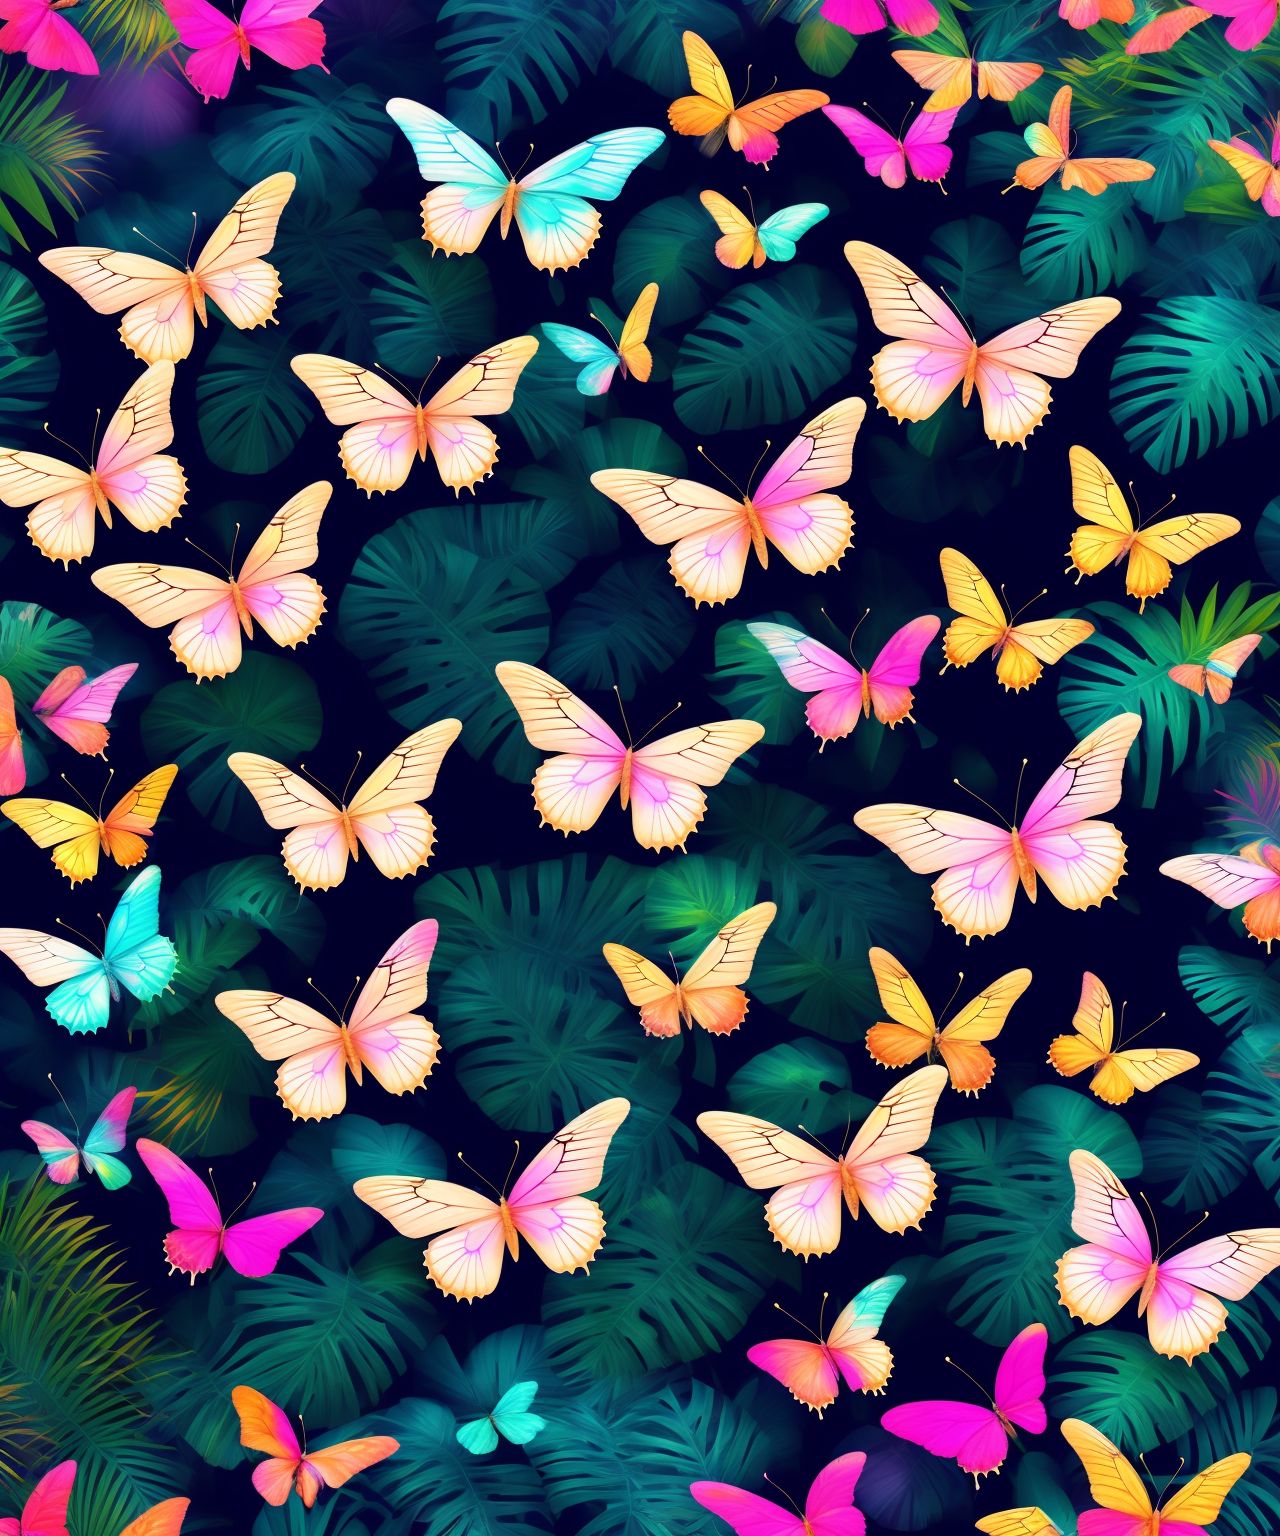 A realistic lush green tropical forest with endless amounts of pink, gold, blue, white and orange butterflies, Blue, Pink, White